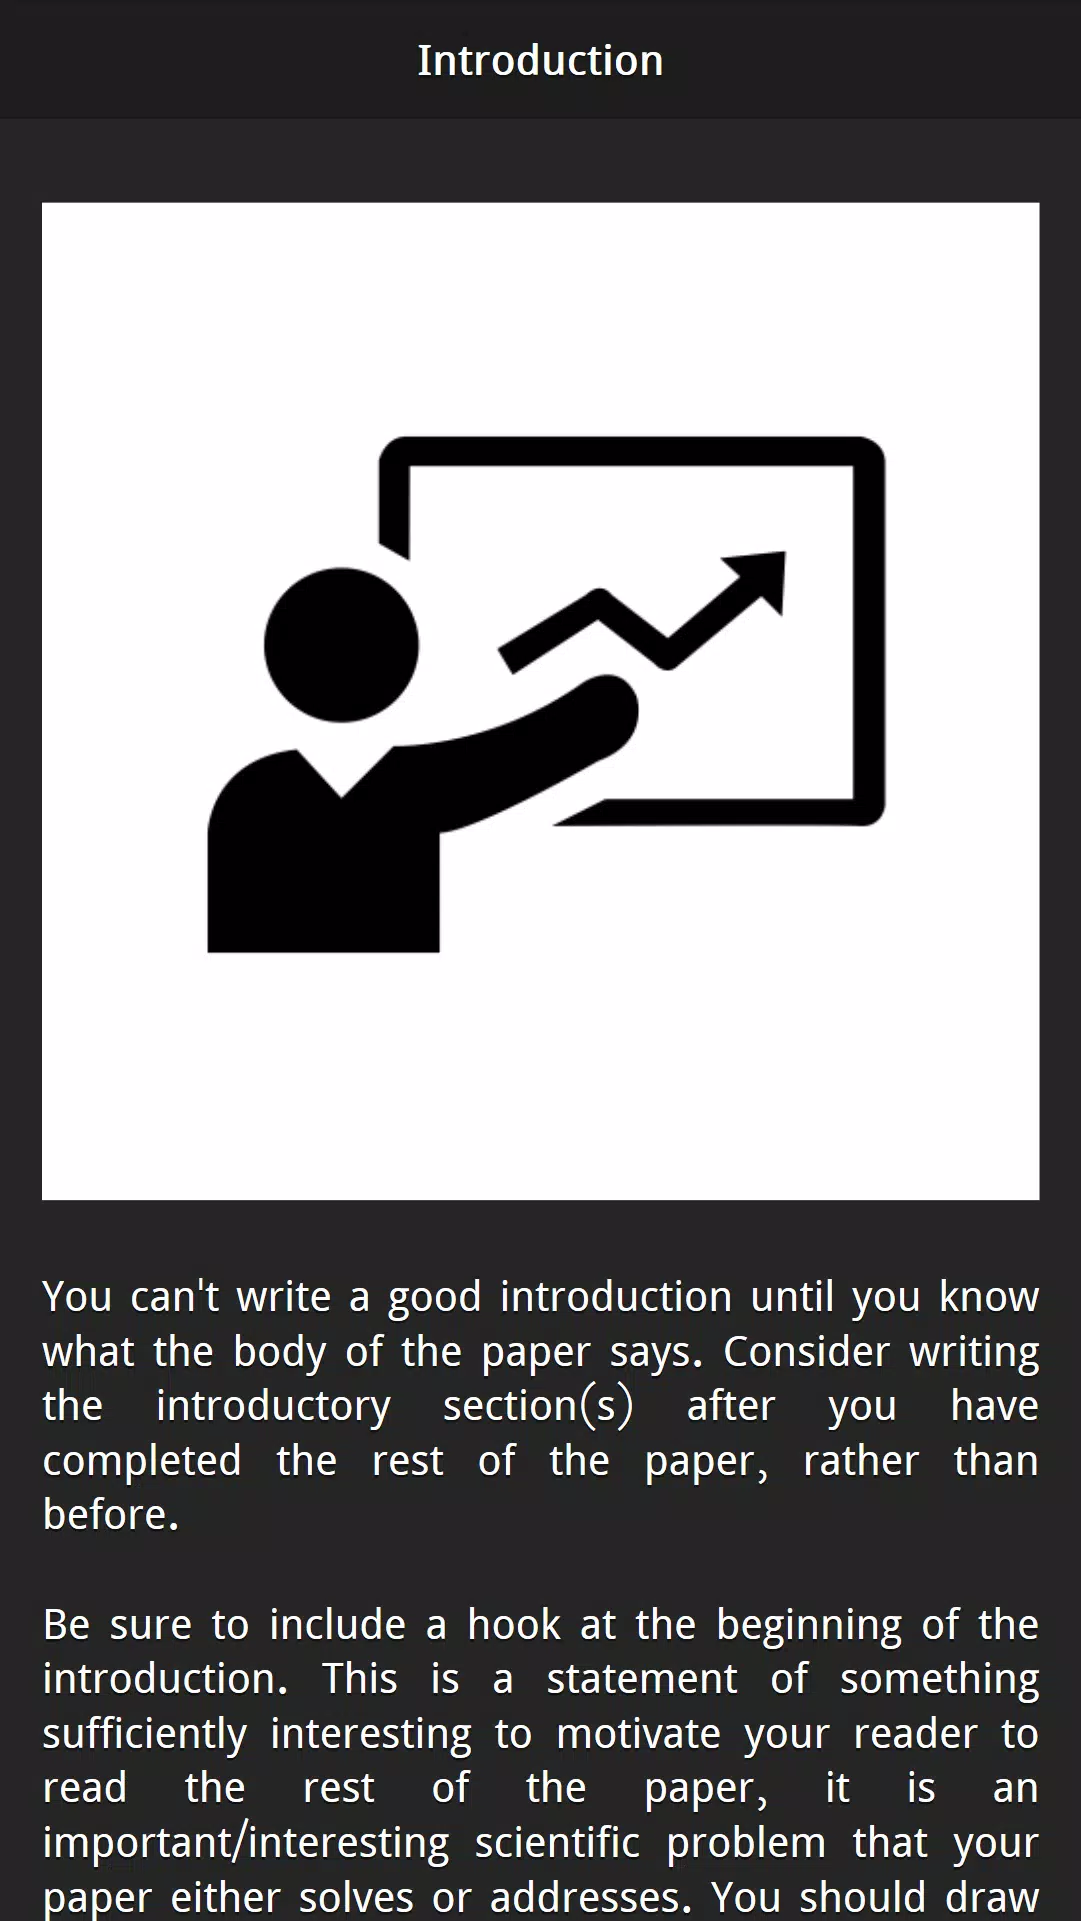 how to write a good hook for a research paper